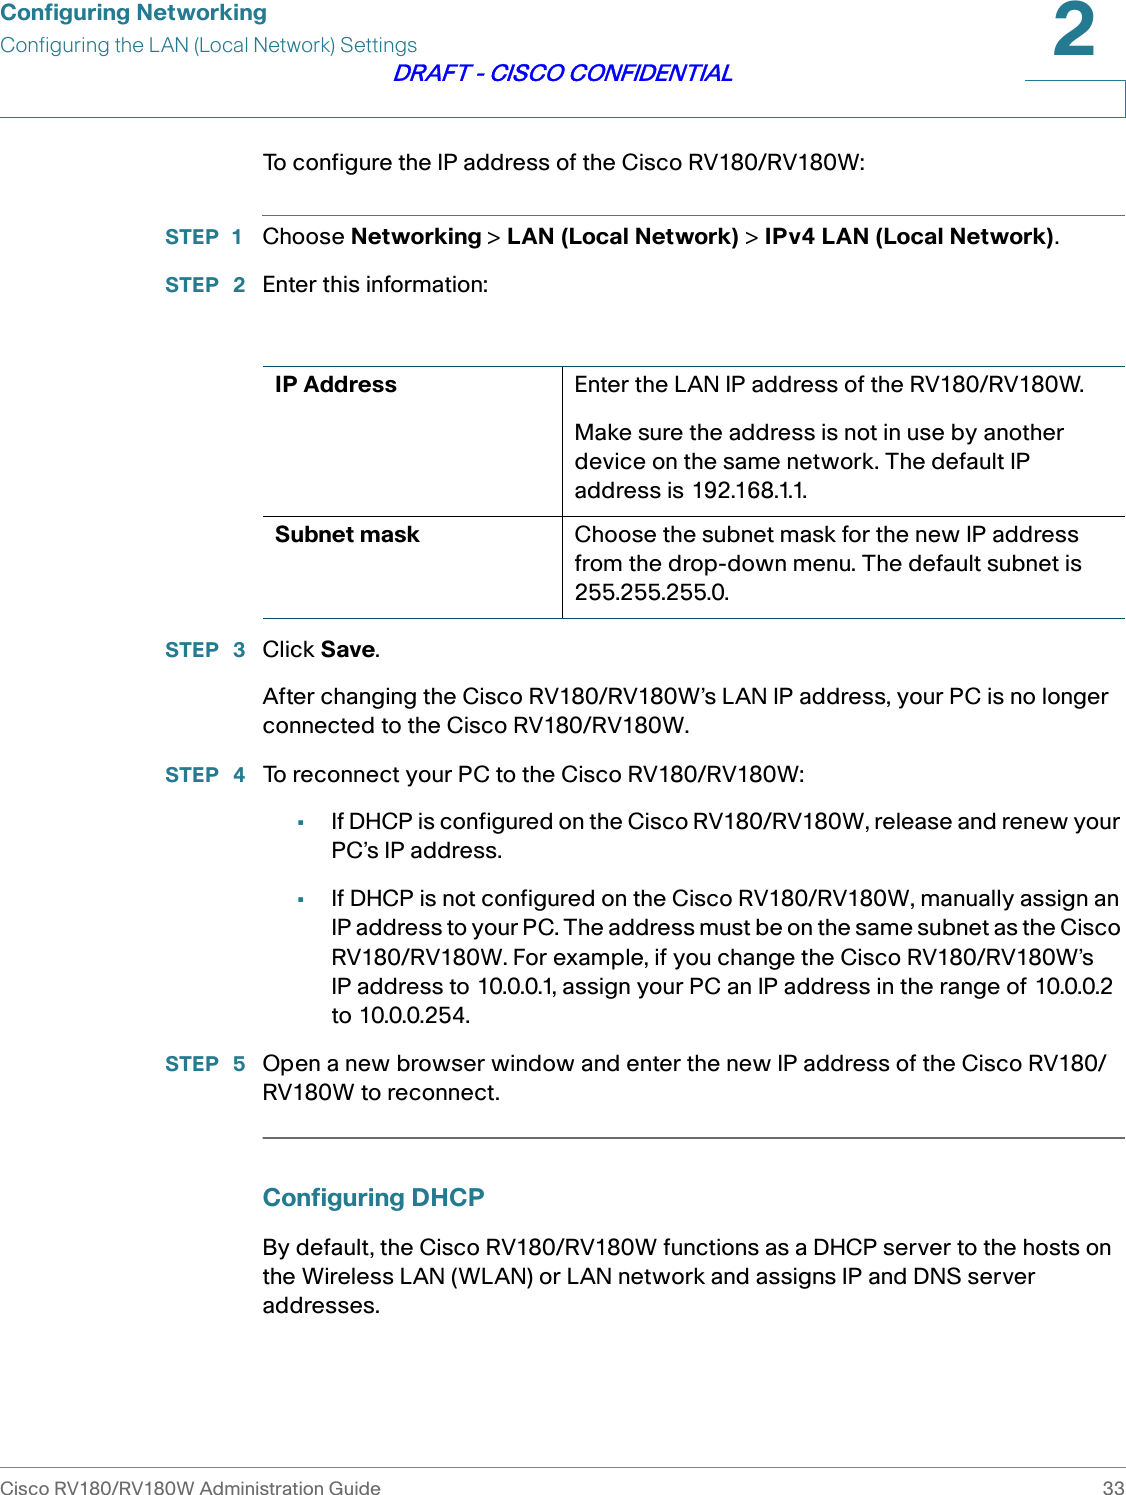 Configuring NetworkingConfiguring the LAN (Local Network) SettingsCisco RV180/RV180W Administration Guide 332DRAFT - CISCO CONFIDENTIALTo configure the IP address of the Cisco RV180/RV180W:STEP 1 Choose Networking &gt; LAN (Local Network) &gt; IPv4 LAN (Local Network).STEP  2 Enter this information:STEP  3 Click Save.After changing the Cisco RV180/RV180W’s LAN IP address, your PC is no longer connected to the Cisco RV180/RV180W. STEP  4 To reconnect your PC to the Cisco RV180/RV180W:•If DHCP is configured on the Cisco RV180/RV180W, release and renew your PC’s IP address.•If DHCP is not configured on the Cisco RV180/RV180W, manually assign an IP address to your PC. The address must be on the same subnet as the Cisco RV180/RV180W. For example, if you change the Cisco RV180/RV180W’s IP address to 10.0.0.1, assign your PC an IP address in the range of 10.0.0.2 to 10.0.0.254.STEP  5 Open a new browser window and enter the new IP address of the Cisco RV180/RV180W to reconnect.Configuring DHCPBy default, the Cisco RV180/RV180W functions as a DHCP server to the hosts on the Wireless LAN (WLAN) or LAN network and assigns IP and DNS server addresses.IP Address Enter the LAN IP address of the RV180/RV180W.Make sure the address is not in use by another device on the same network. The default IP address is 192.168.1.1.Subnet mask Choose the subnet mask for the new IP address from the drop-down menu. The default subnet is 255.255.255.0.